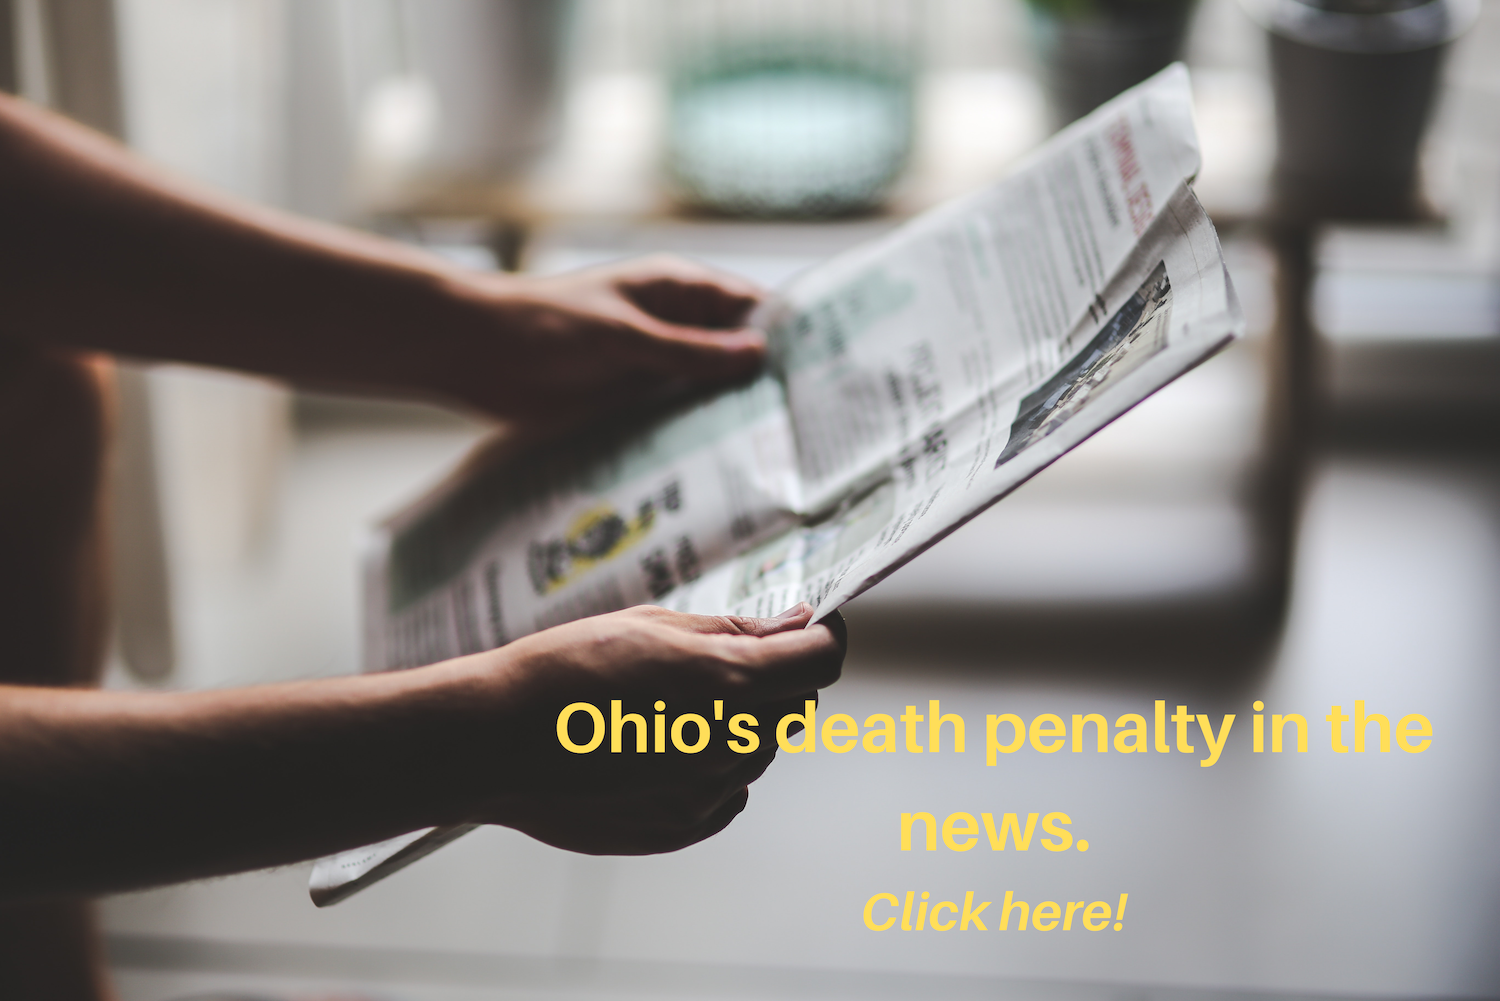 Ohioans To Stop Executions The Push For Abolishing The Death Penalty